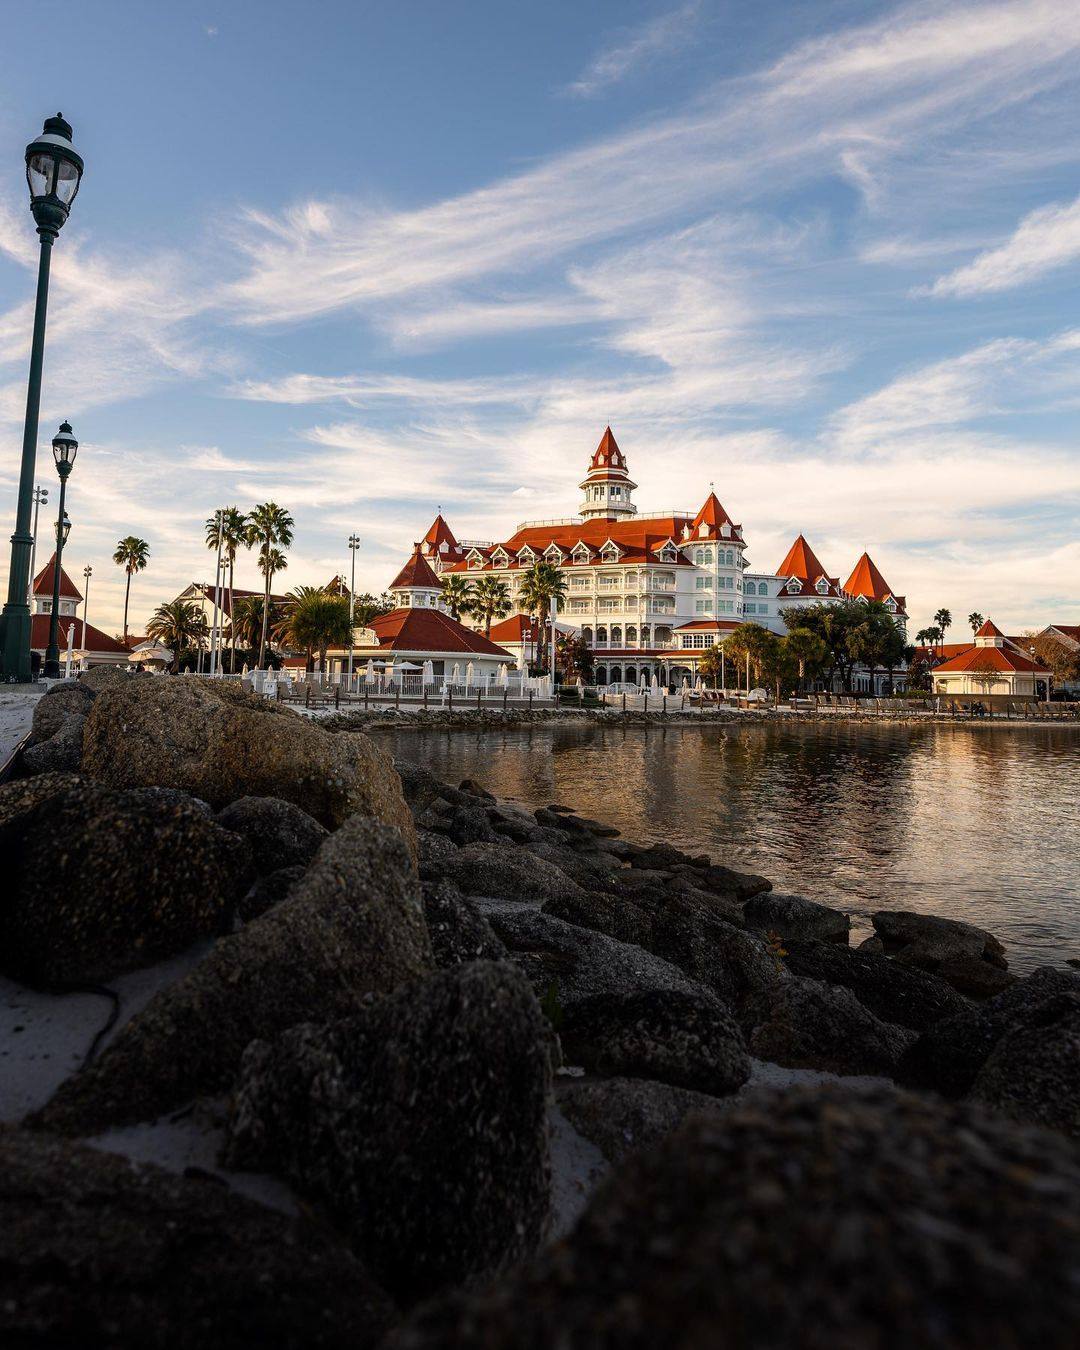 Grand Floridian is Disney World’s most expensive hotel, with easy access to the theme park. Photo: @waltdisneyworld/Instagram